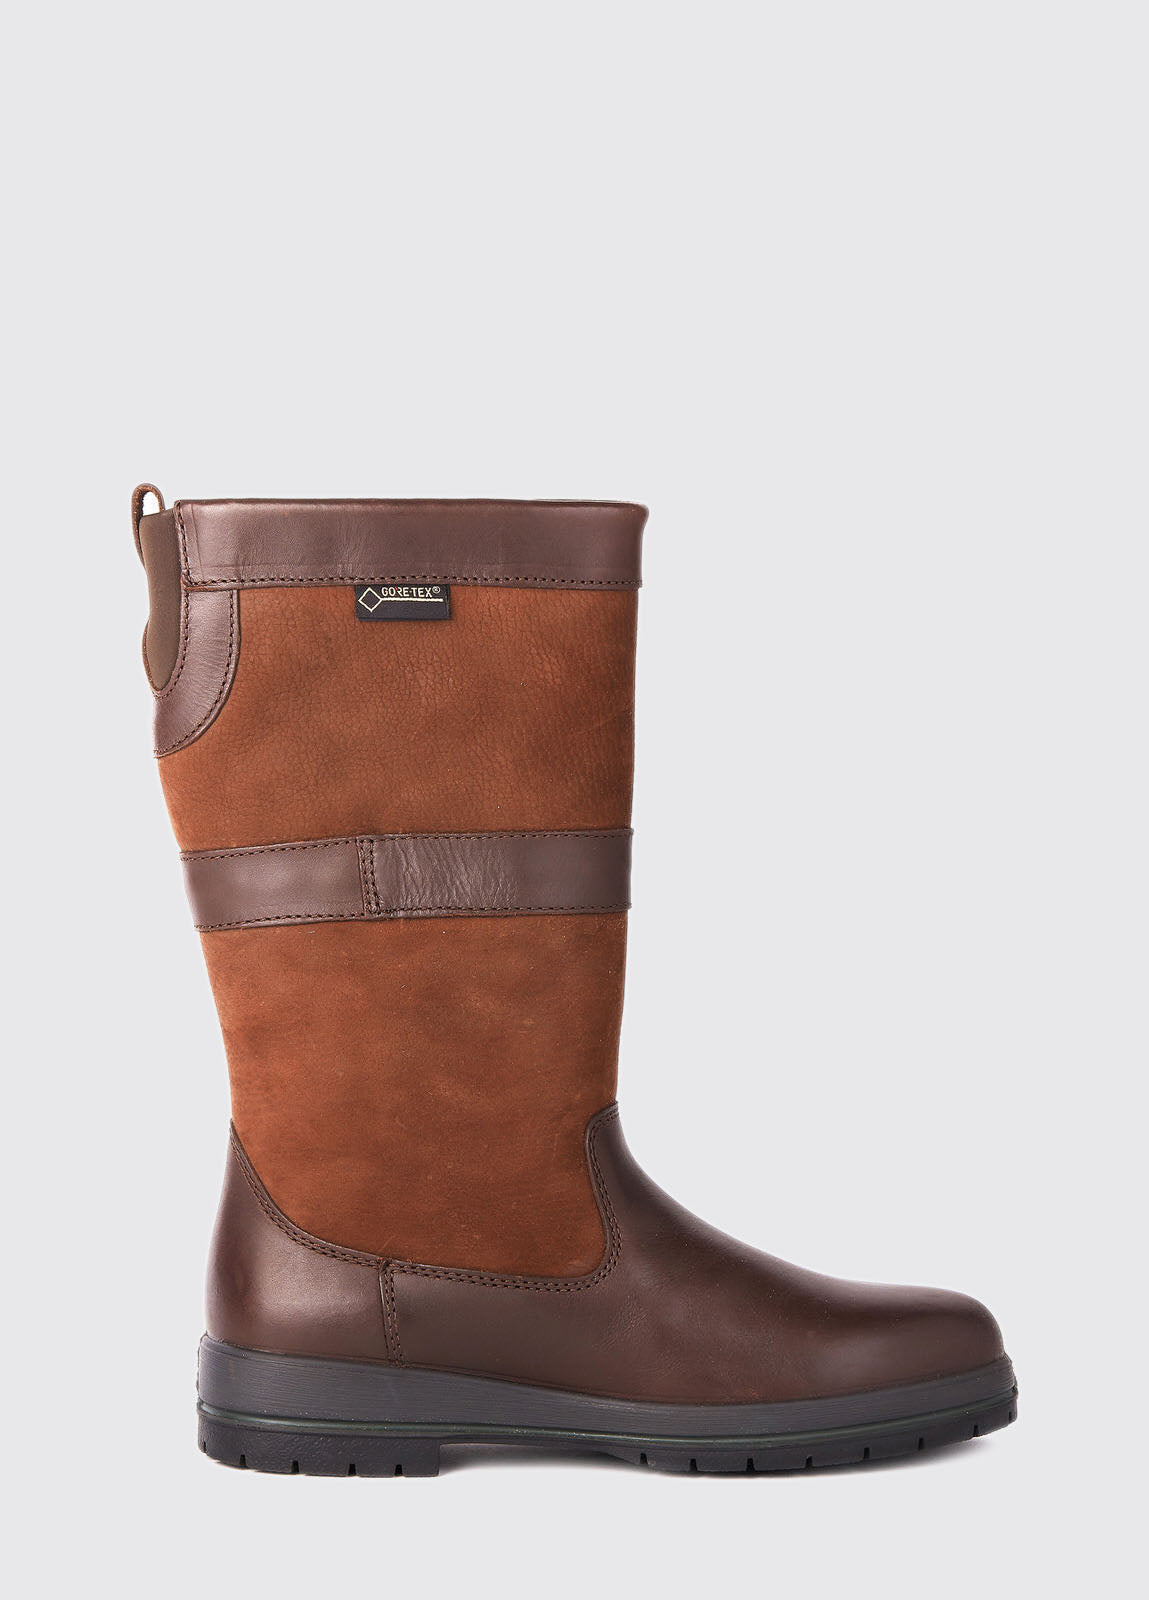 Dubarry Kildare Country Boot in Walnut